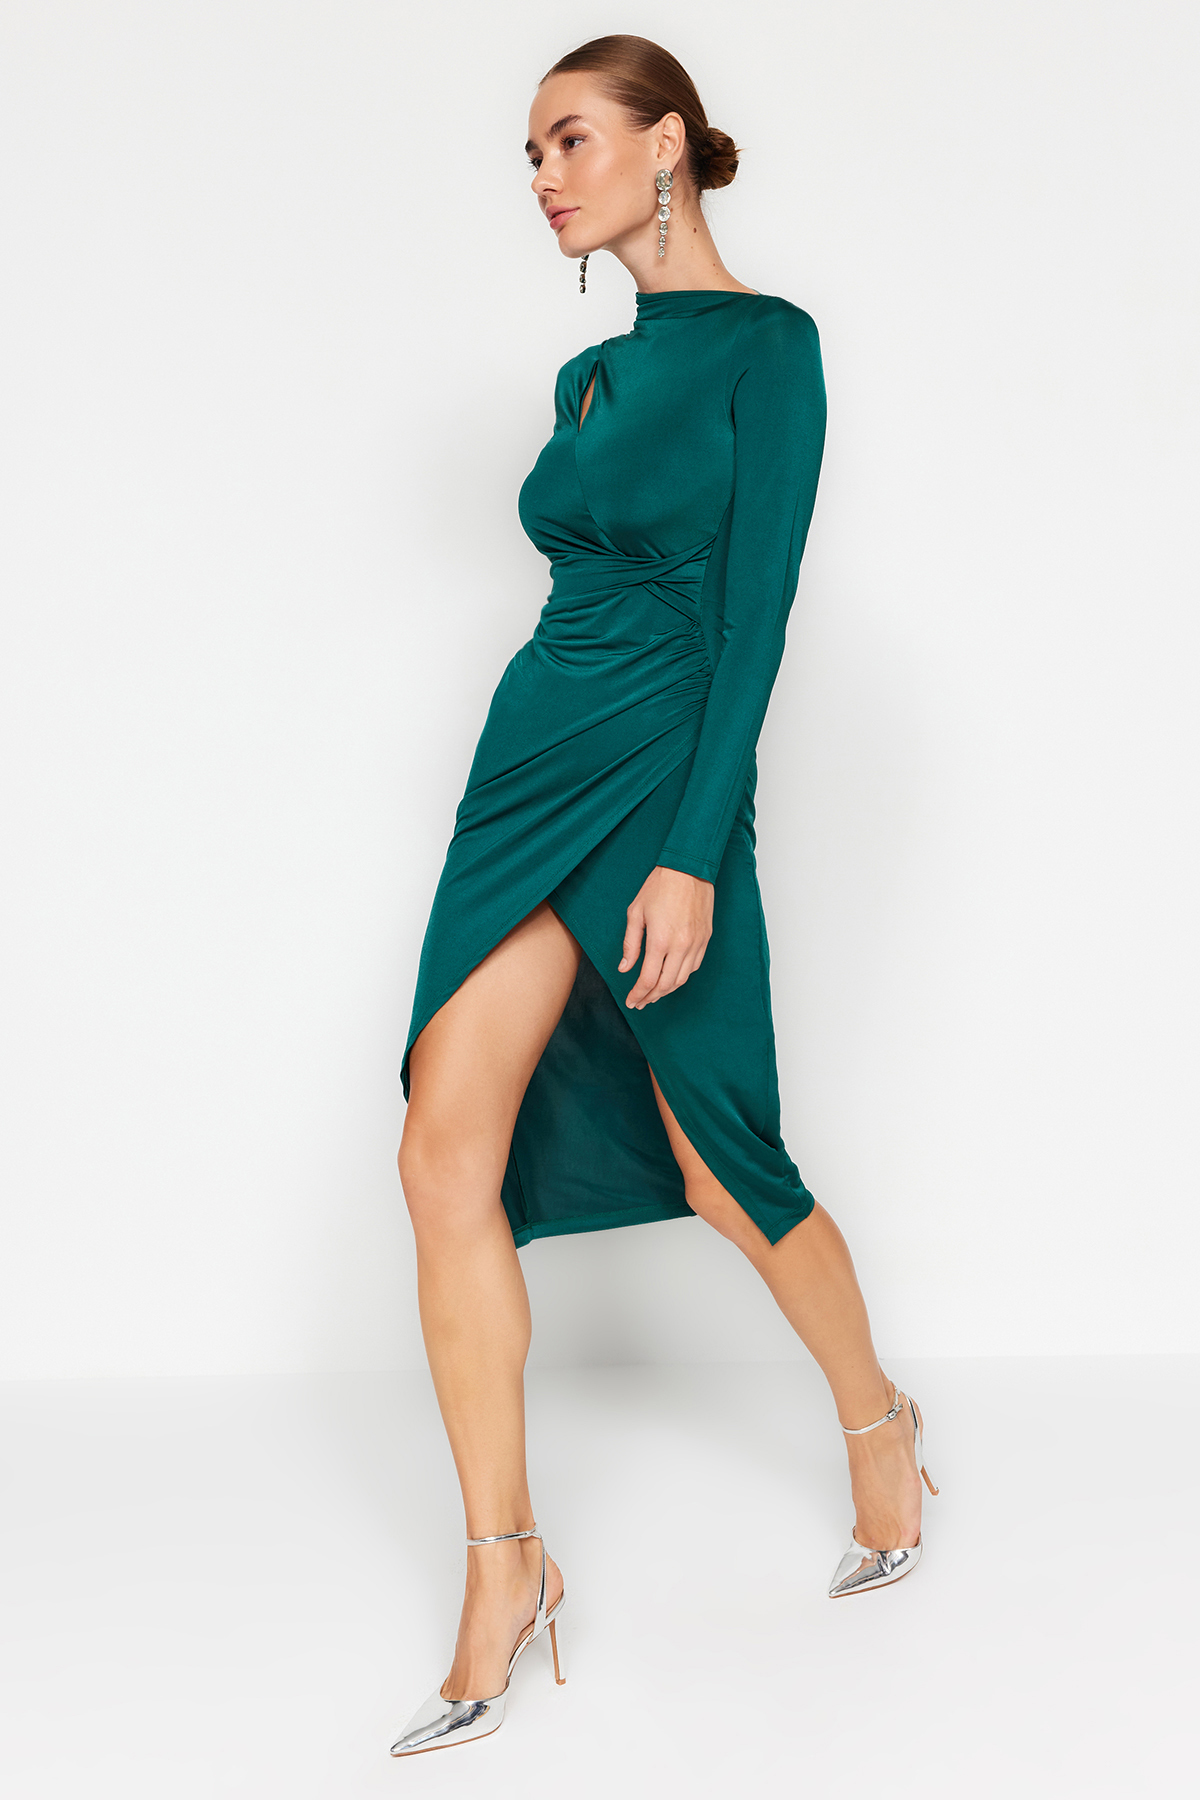 Trendyol Emerald Green Fitted Knitted Window/Cut Out Detailed Dress